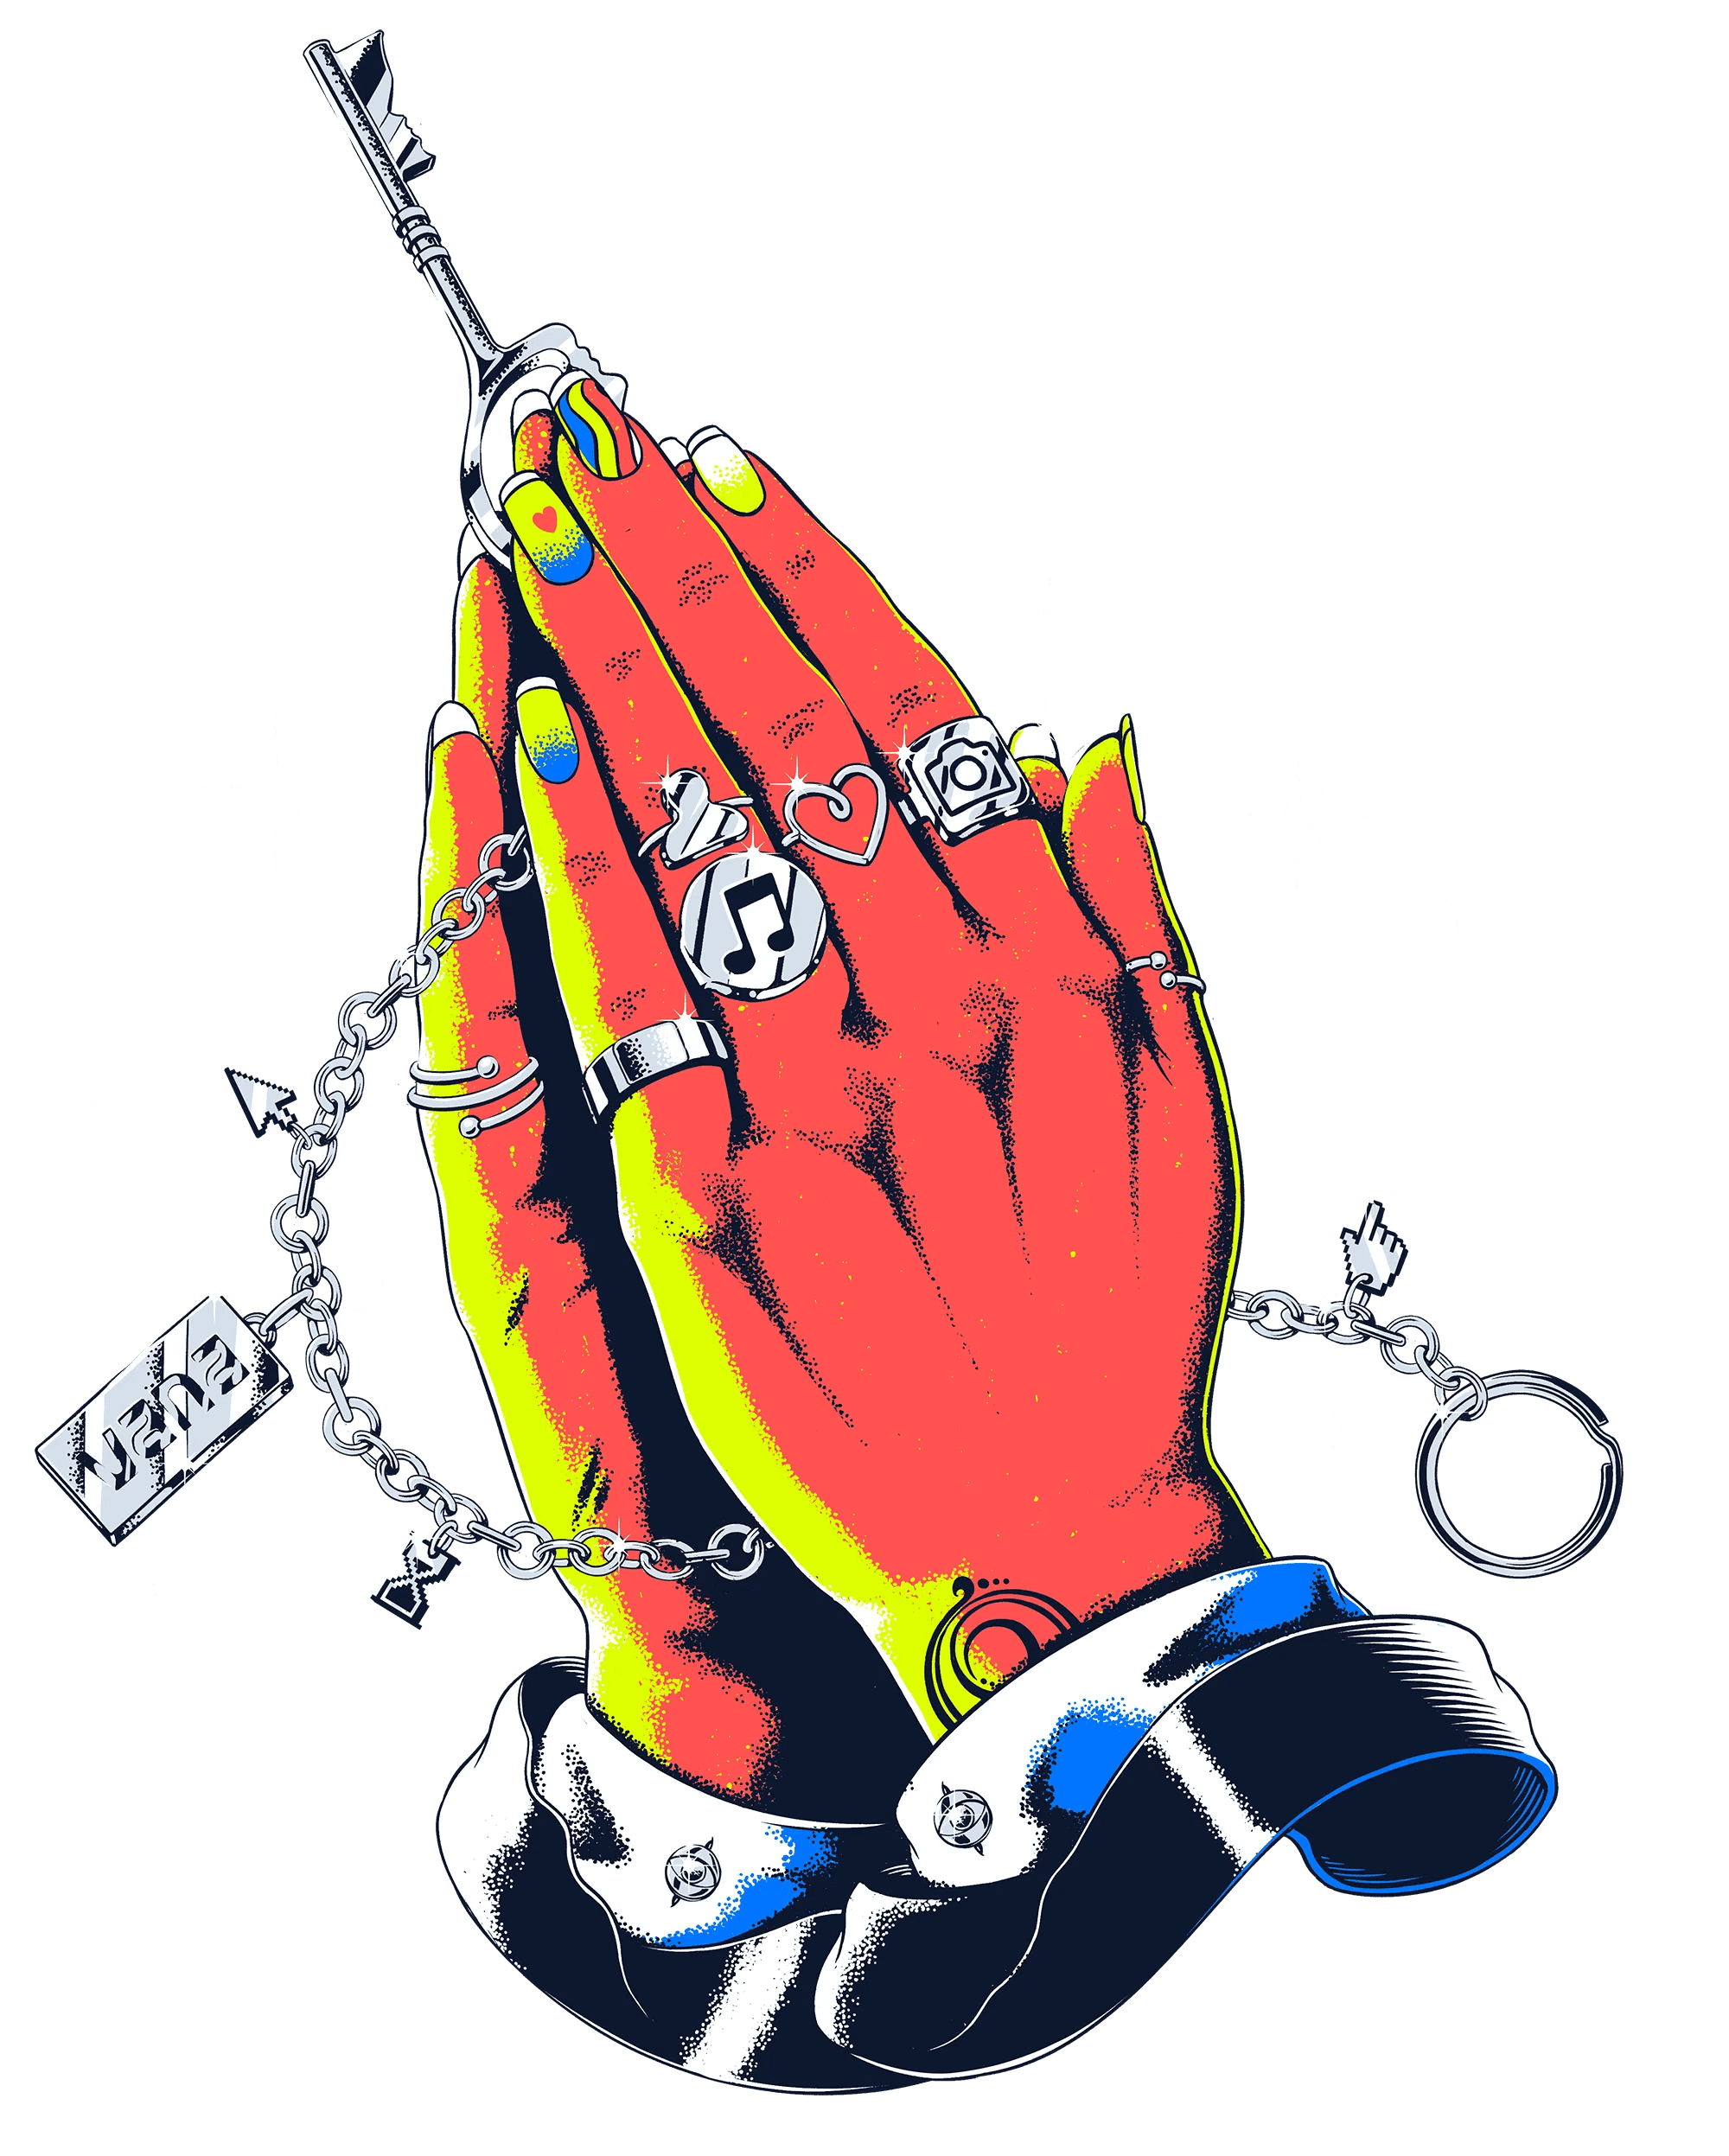 red hand illustration with rings